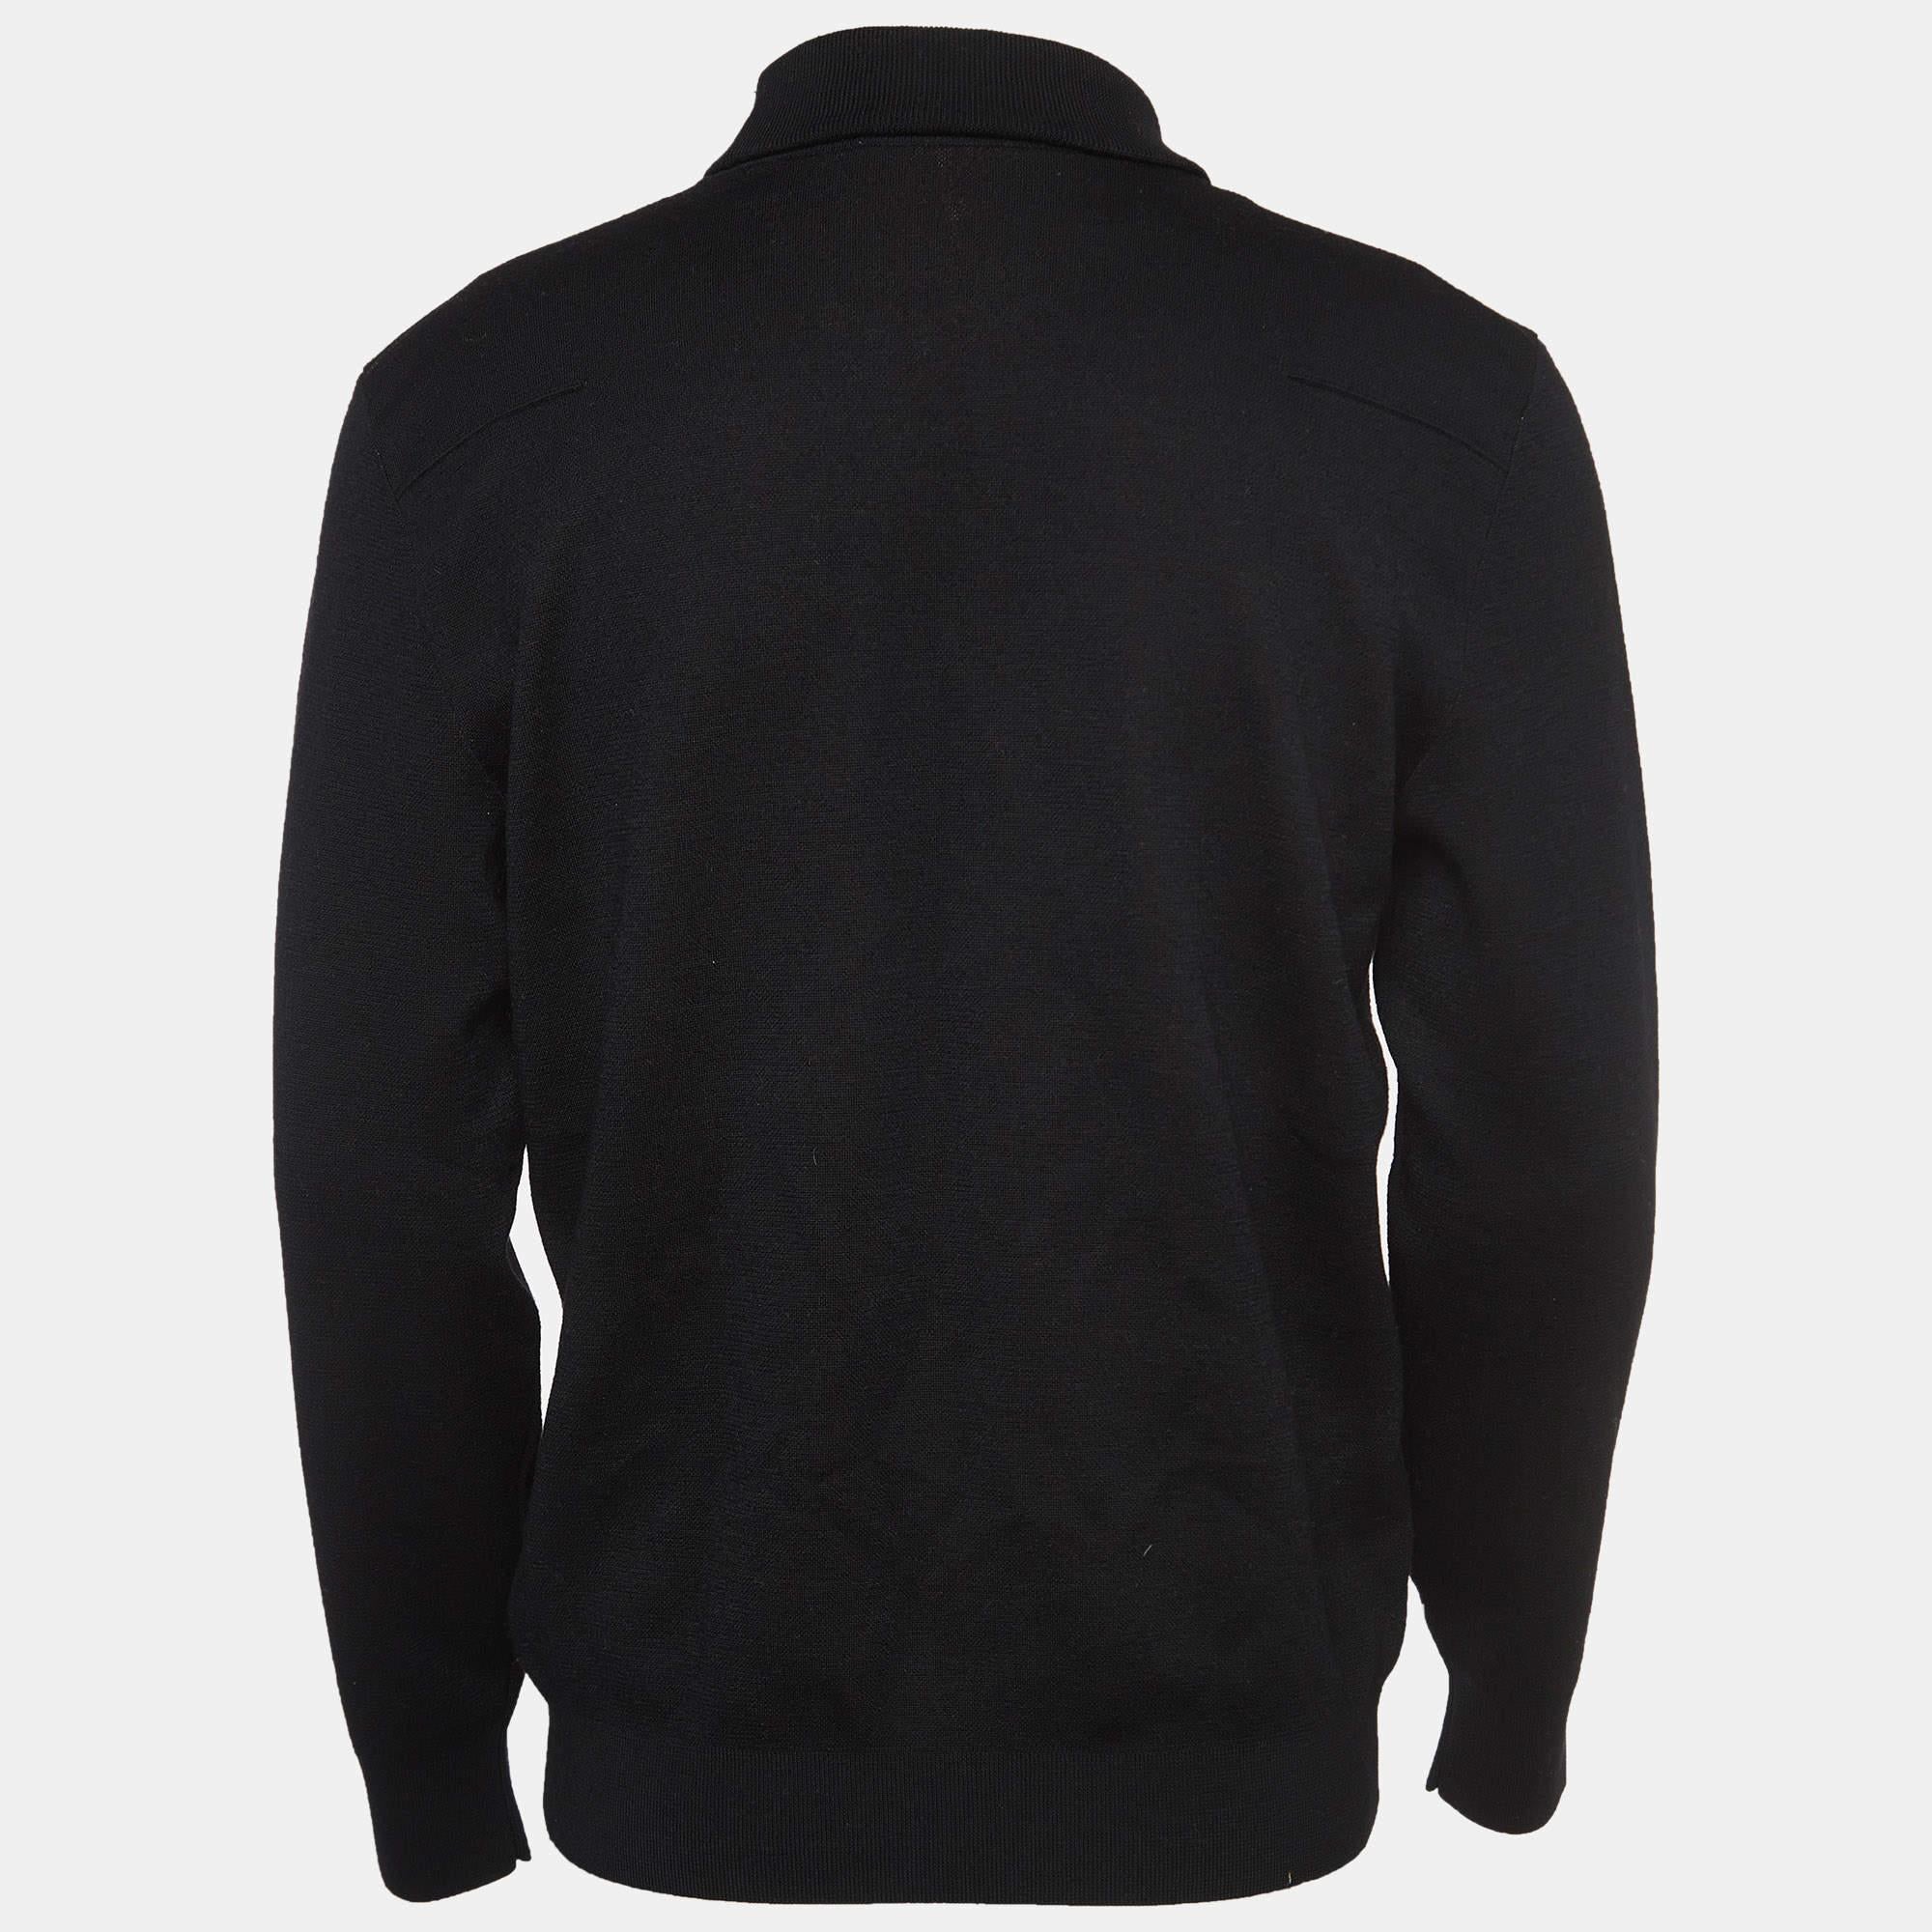 The Dior Homme sweater exudes sophistication. Crafted from luxurious wool, it features a sleek black hue, intricate Mr. Dior jacquard pattern, and a timeless turtle neck design. This garment effortlessly combines comfort, style, and the iconic